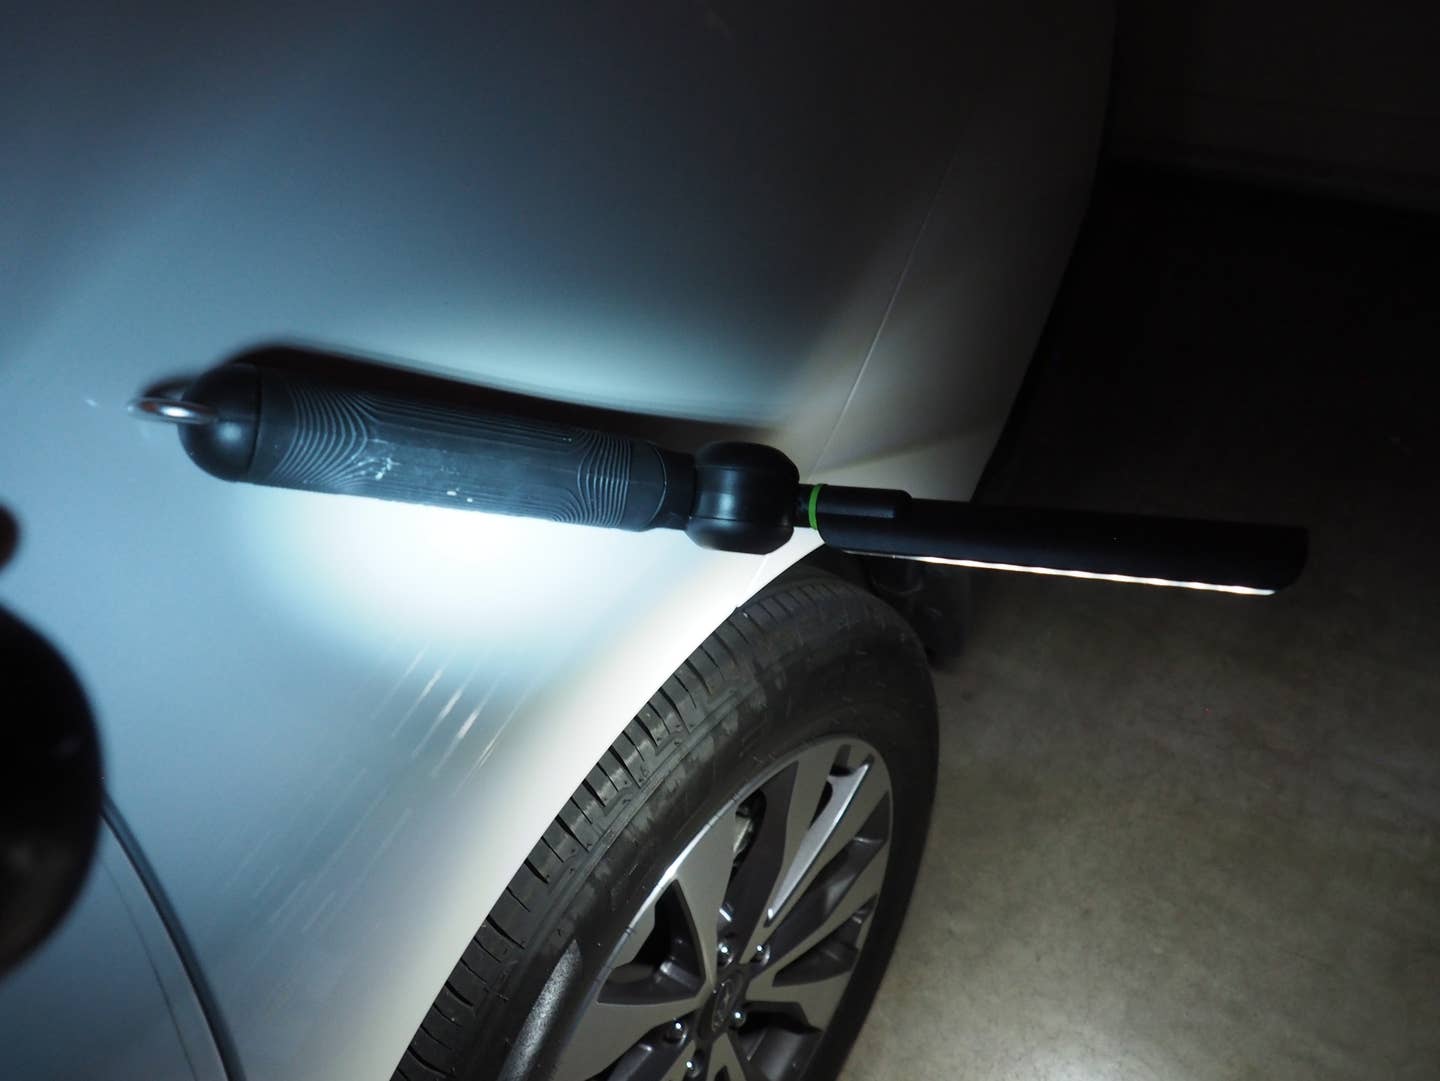 The MYCHANIC Blade light magnetized to the side of a car.